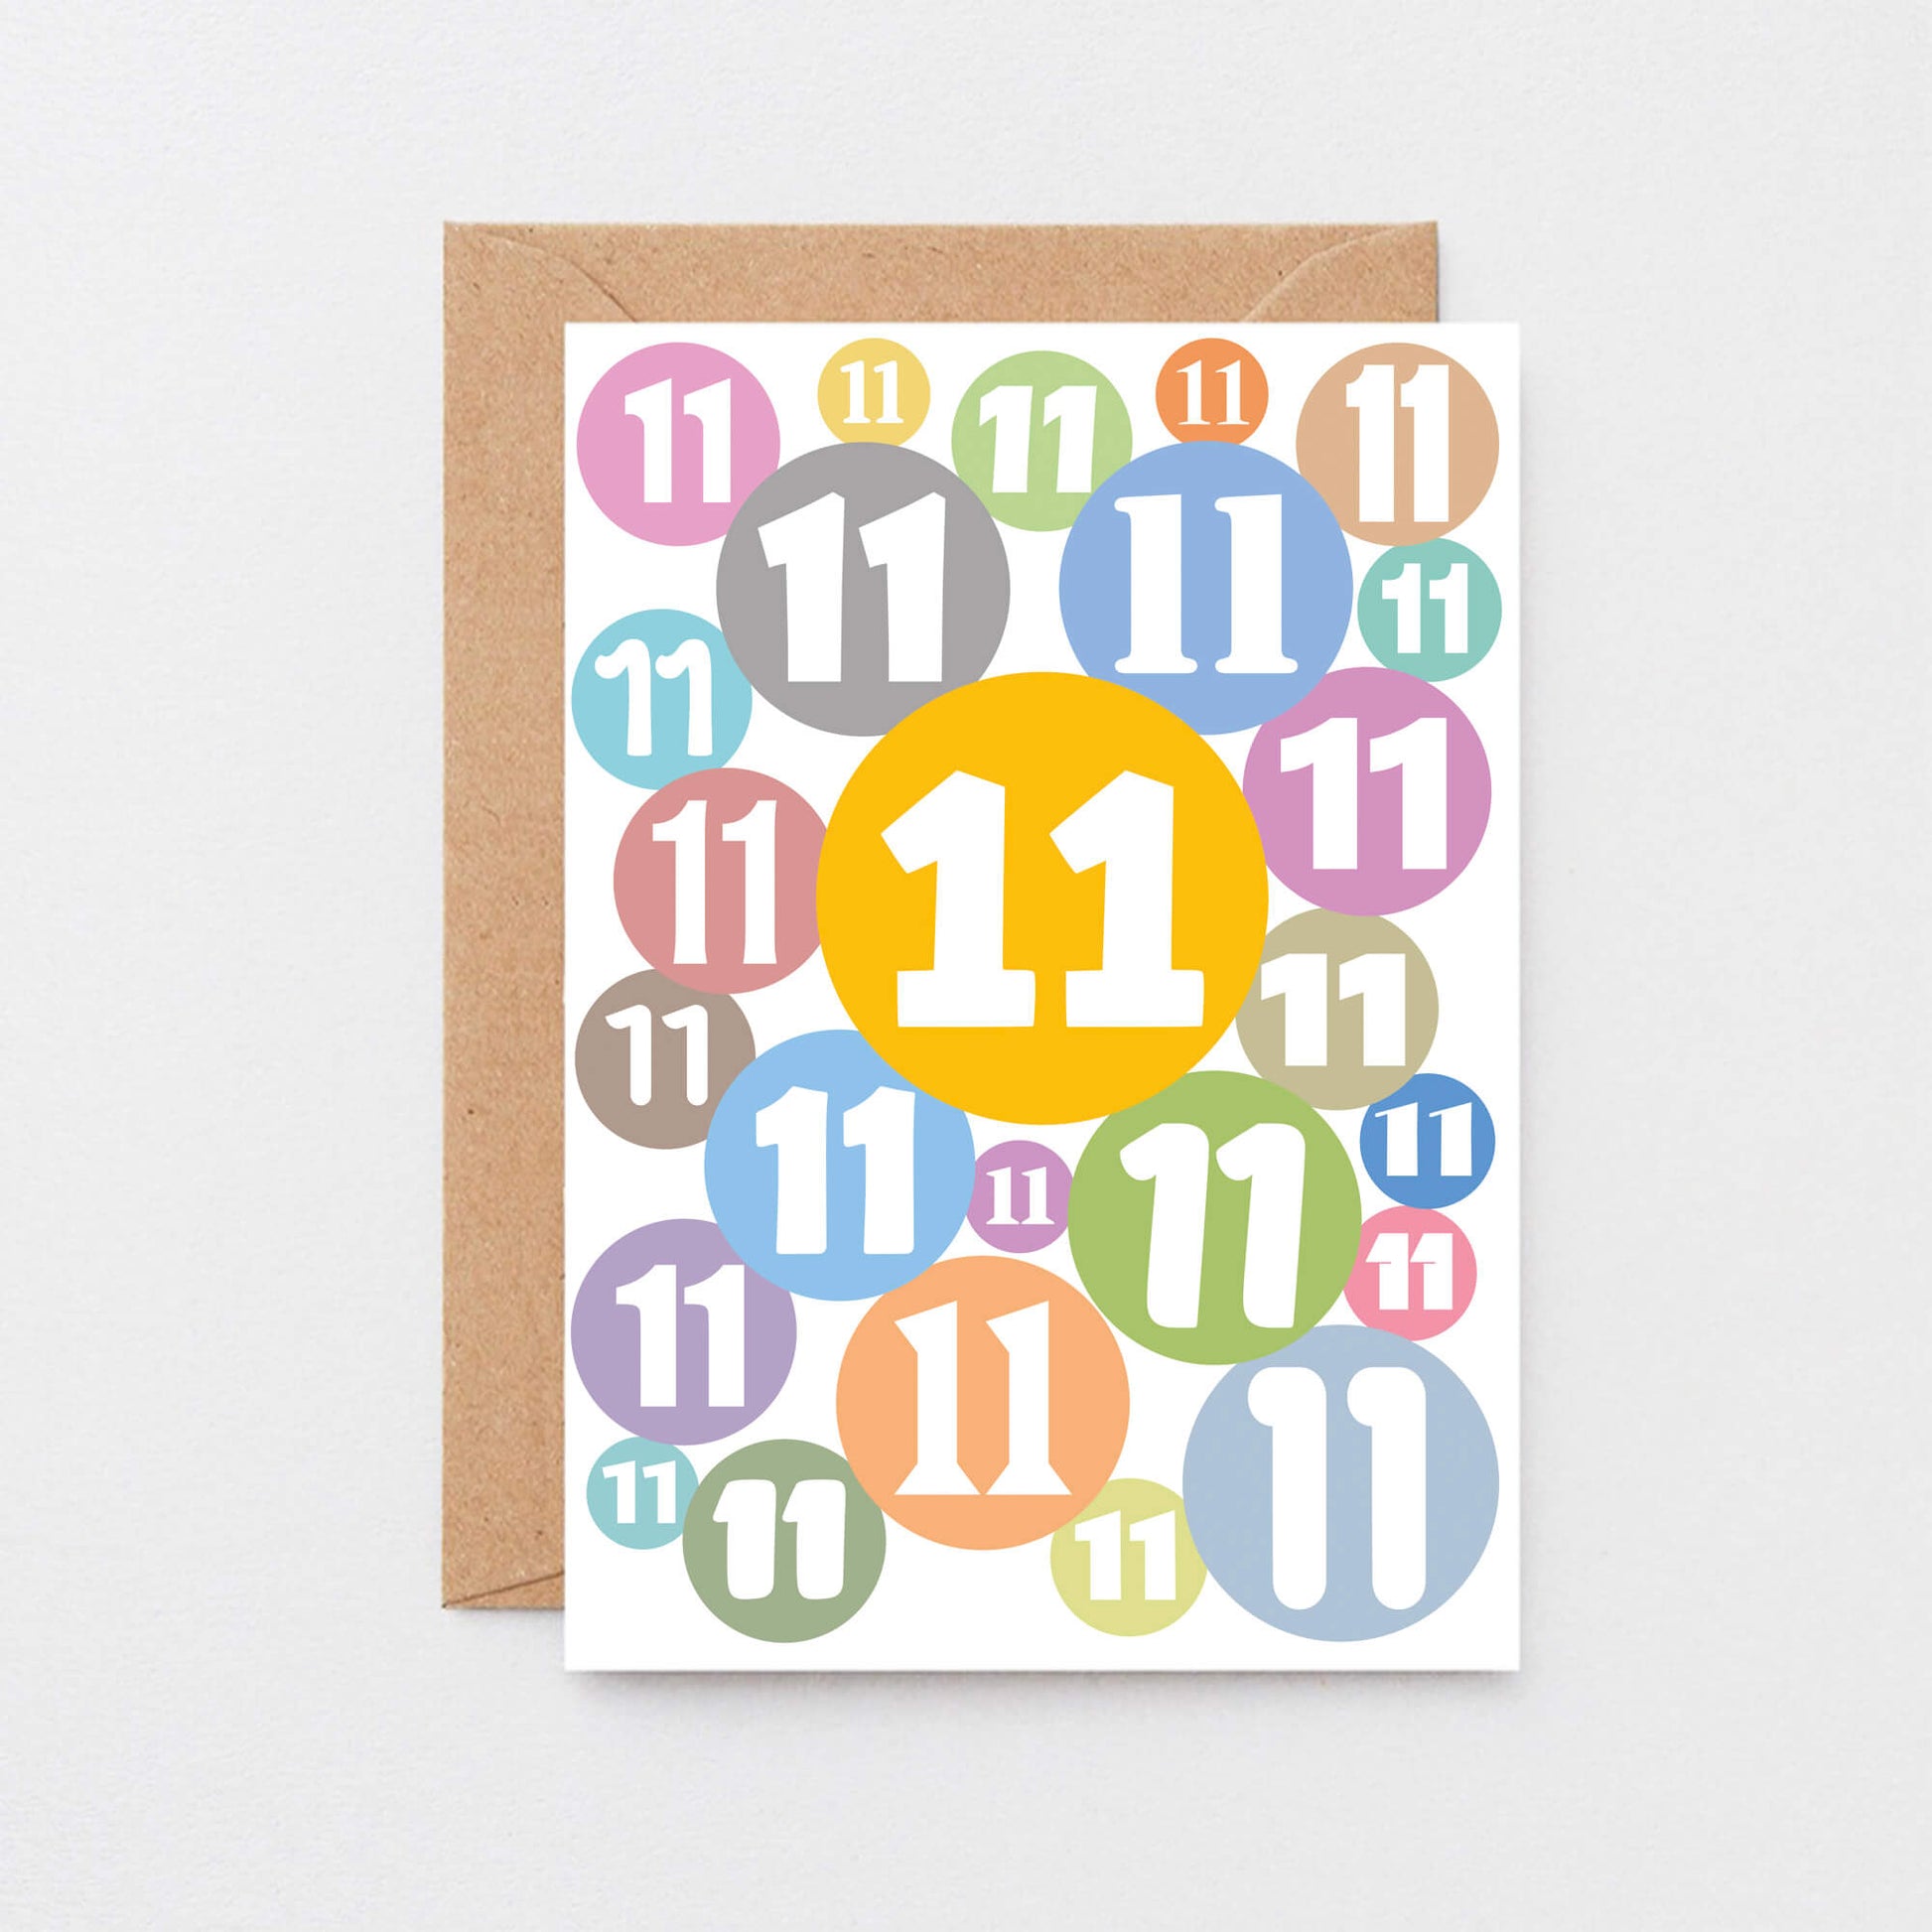 Big 11th Birthday Card by SixElevenCreations. Product Code SE2081A5